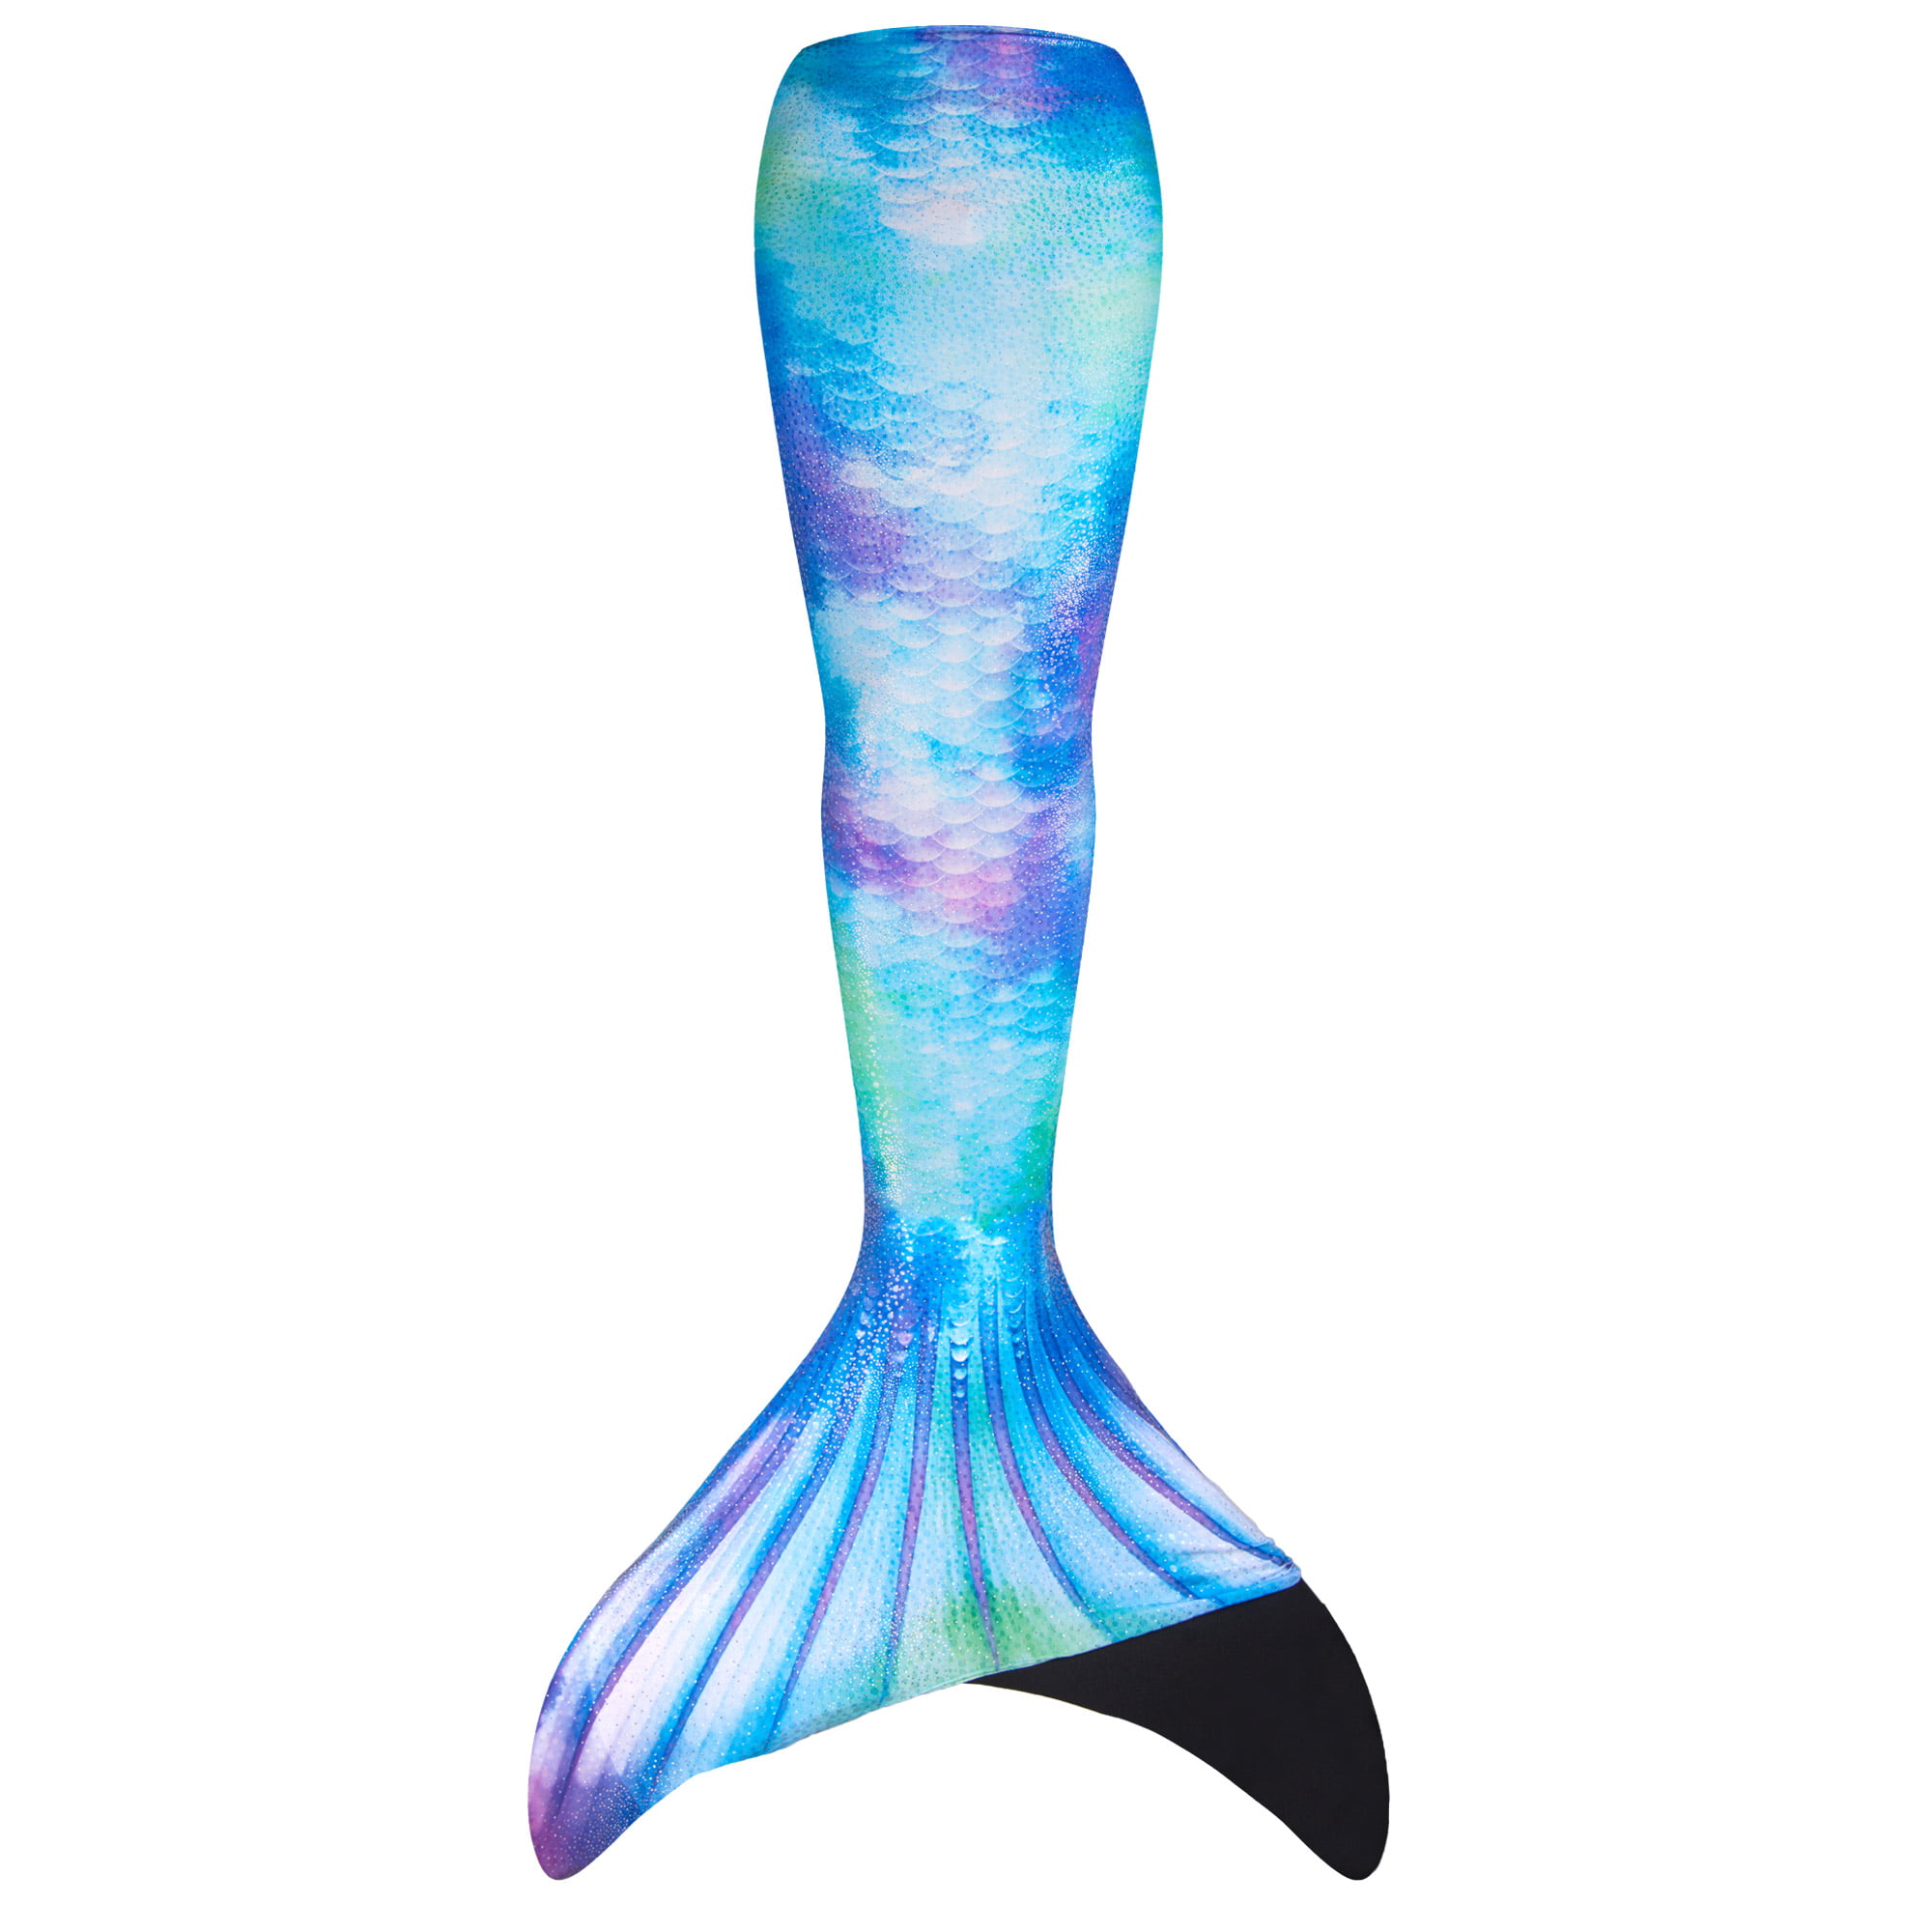 NO Monofin Fin Fun Mermaid Tail Only Bali Breeze Child 8 Reinforced Tips 